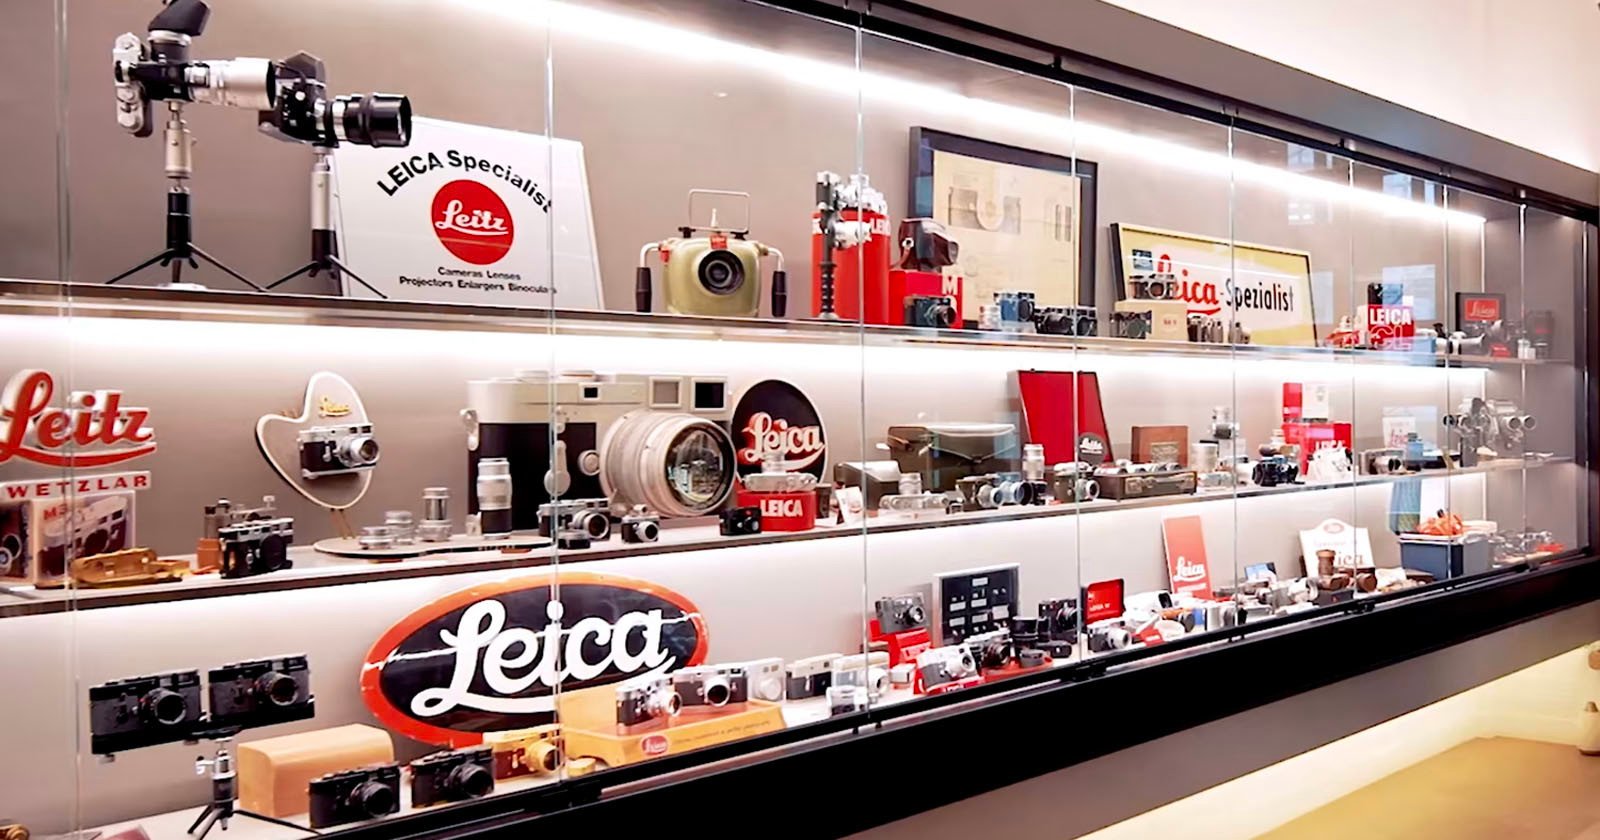 This Collector Has So Many Leica Cameras, He Opened His Own Museum